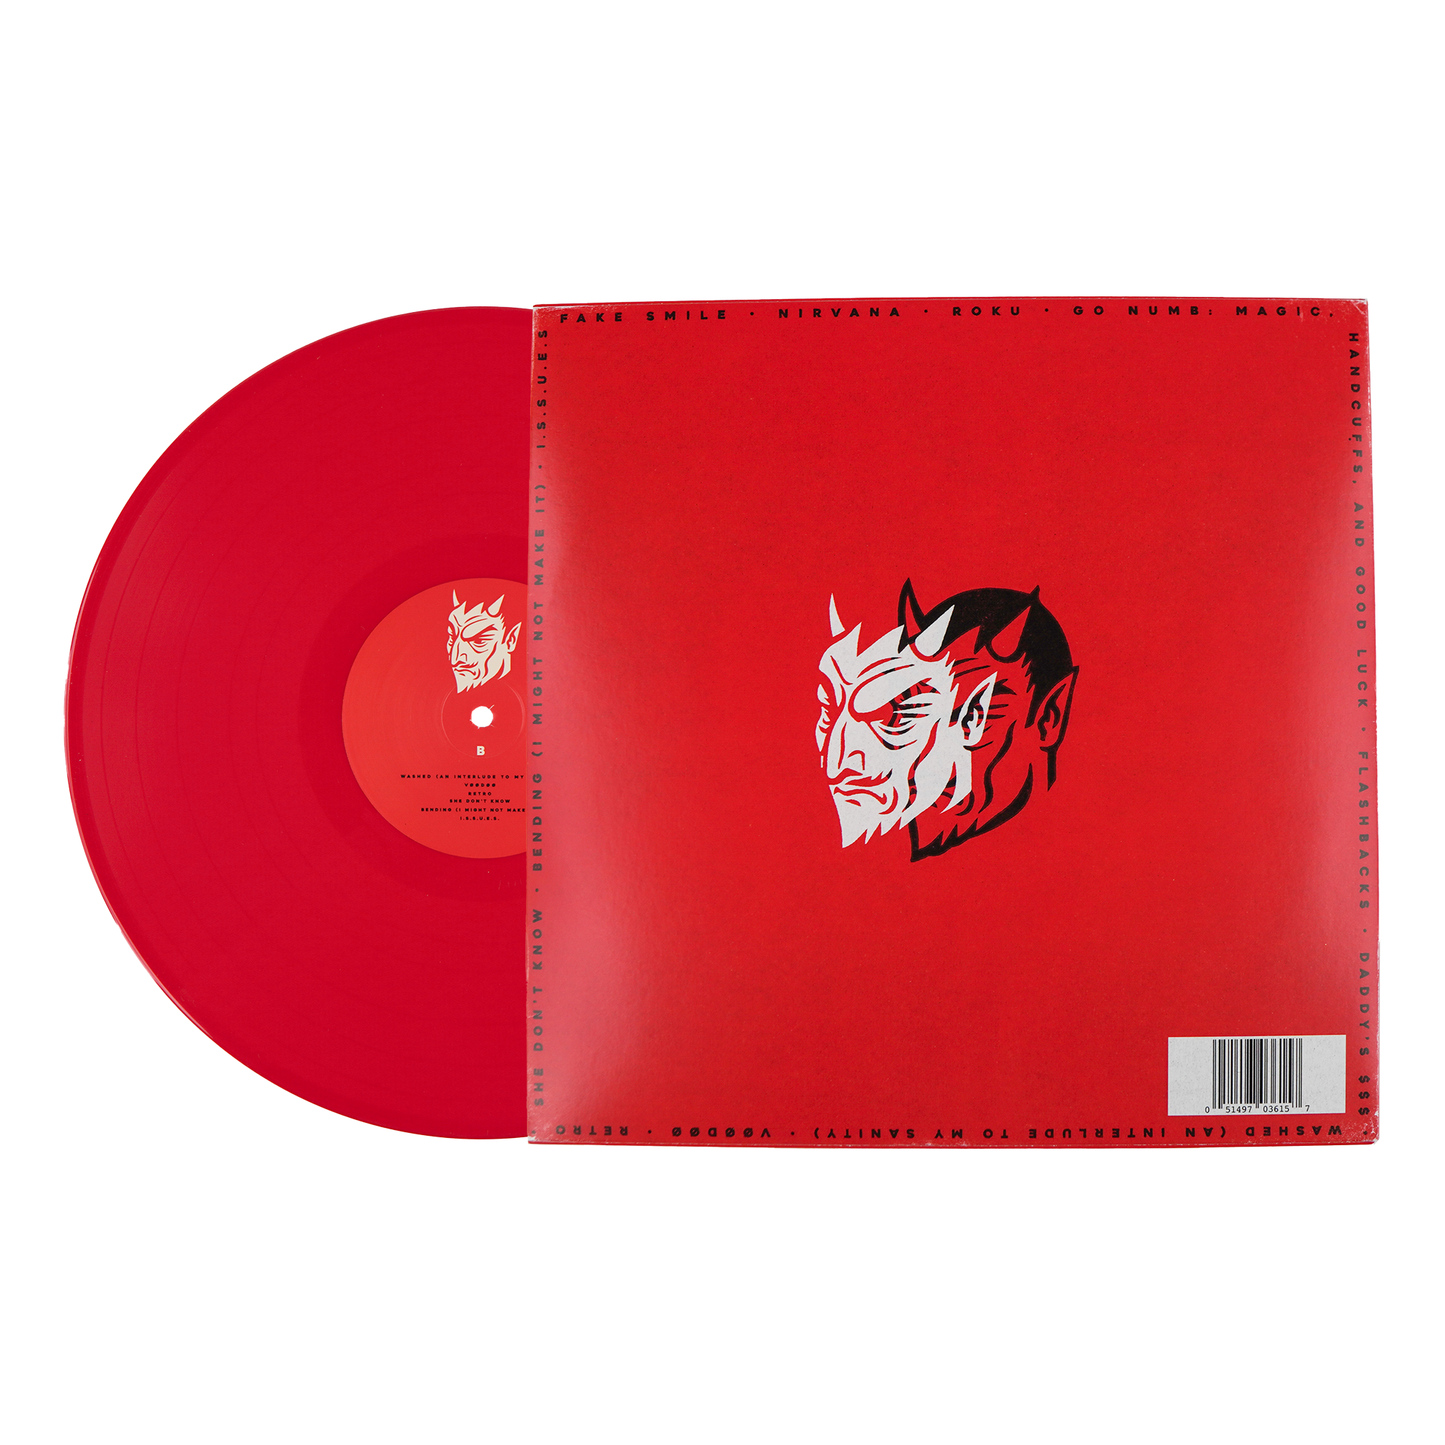 WASHED VINYL -RED